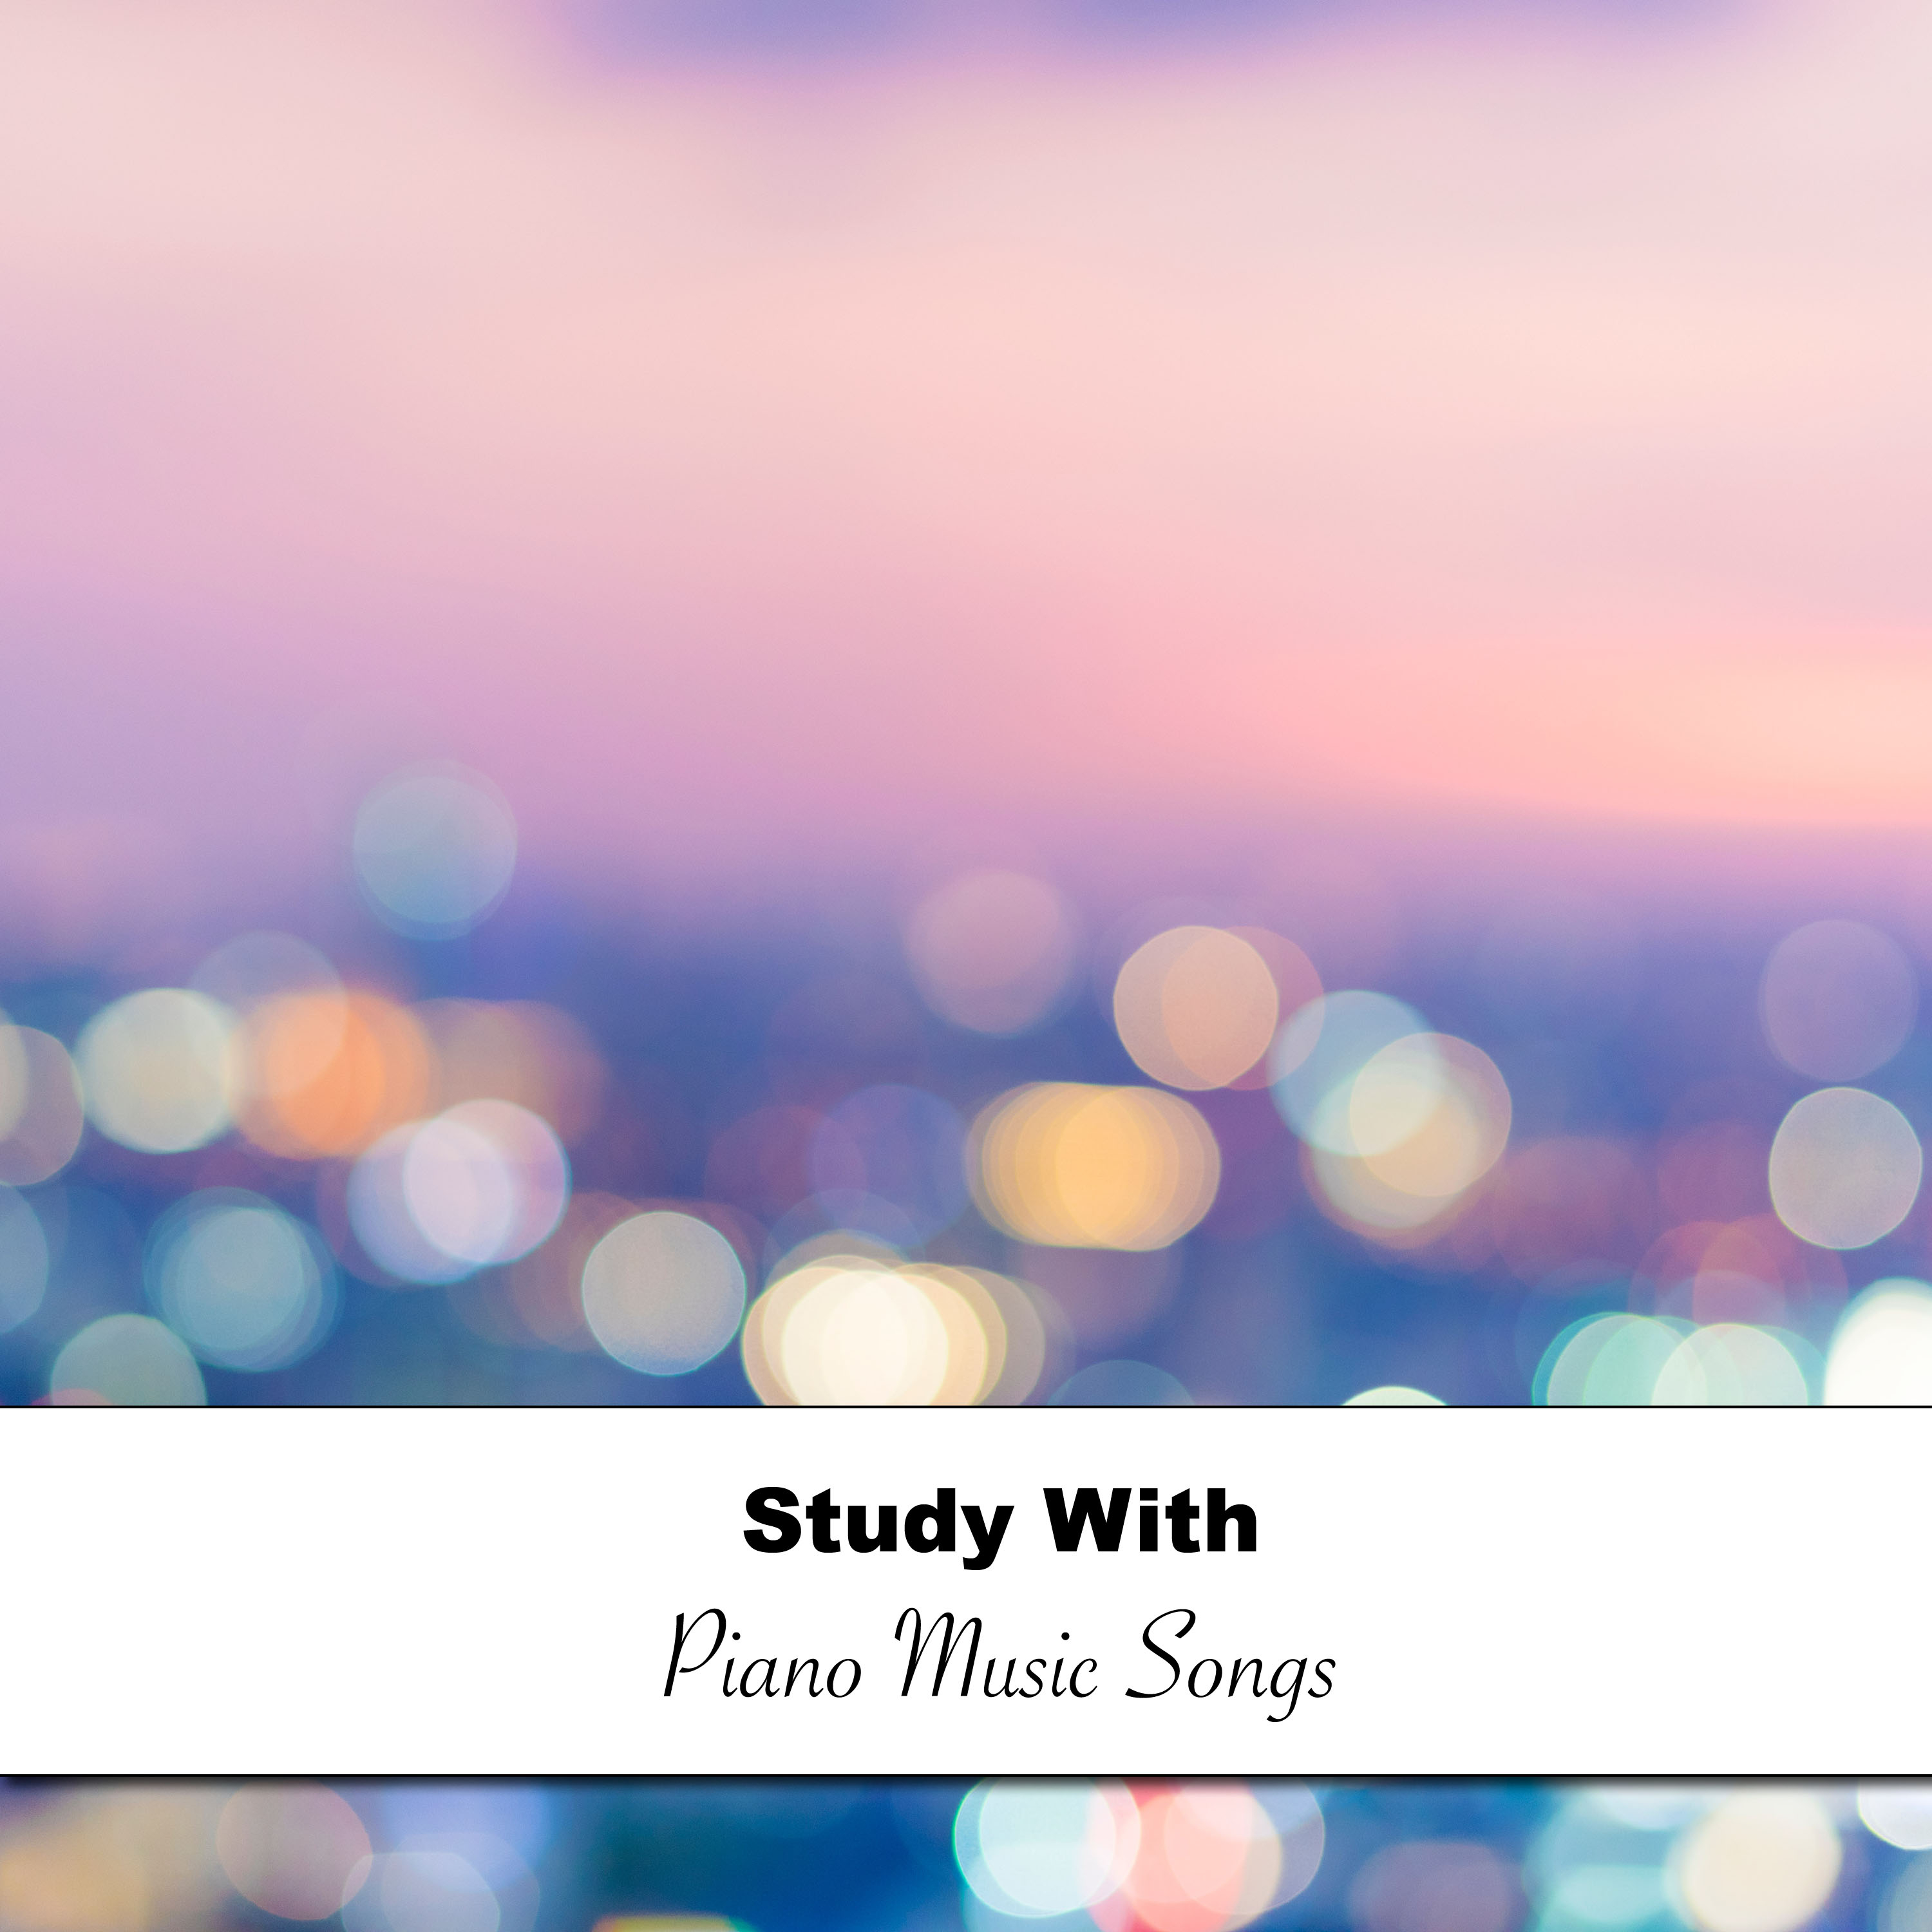 12 Study with Piano Music Songs